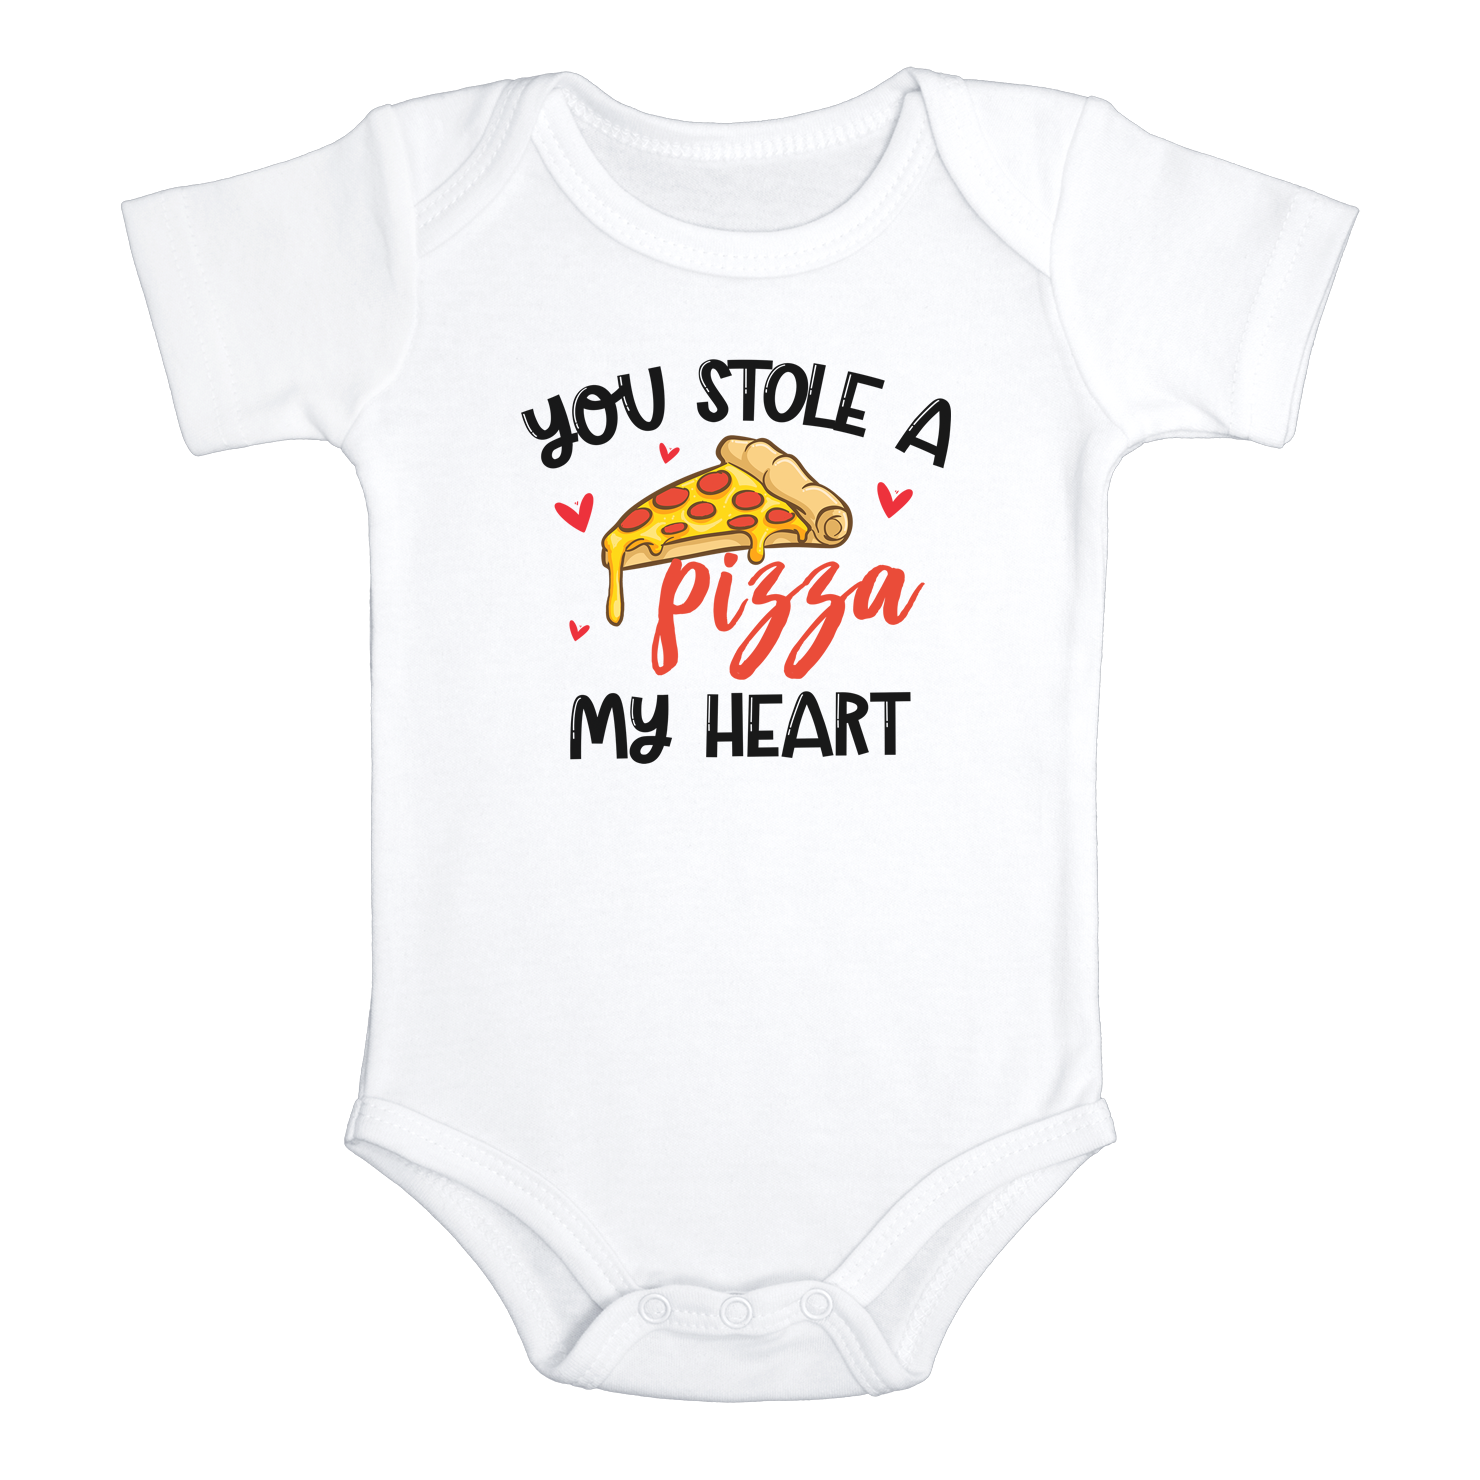 YOU STOLE A PIZZA MY HEART Funny baby onesies pizza bodysuit (white: short or long sleeve) - HappyAddition